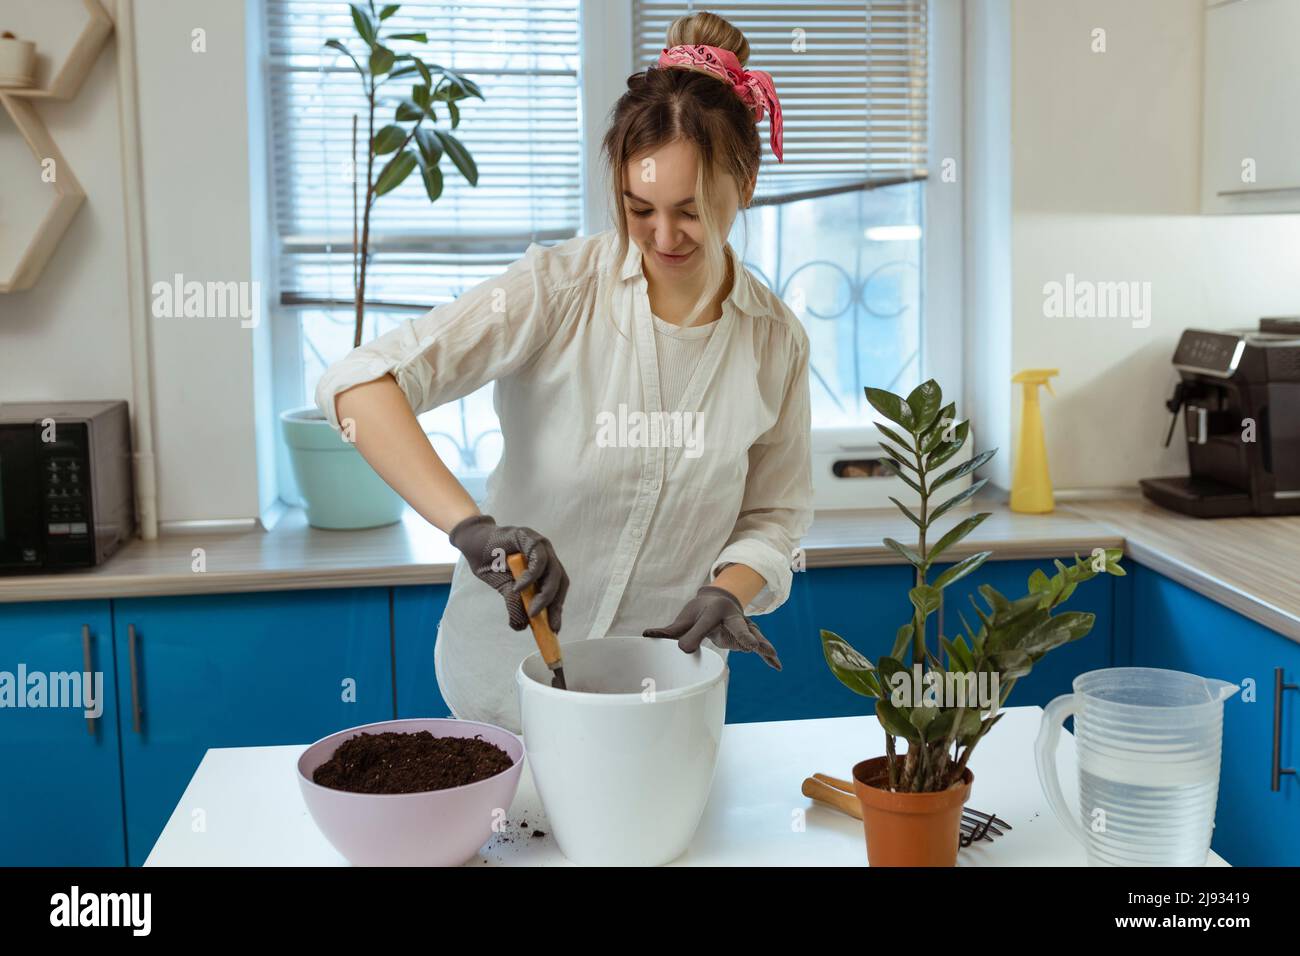 A cute girl transplants a plant at home in garden gloves. Walk and decorate your home with plants and fresh flowers Stock Photo